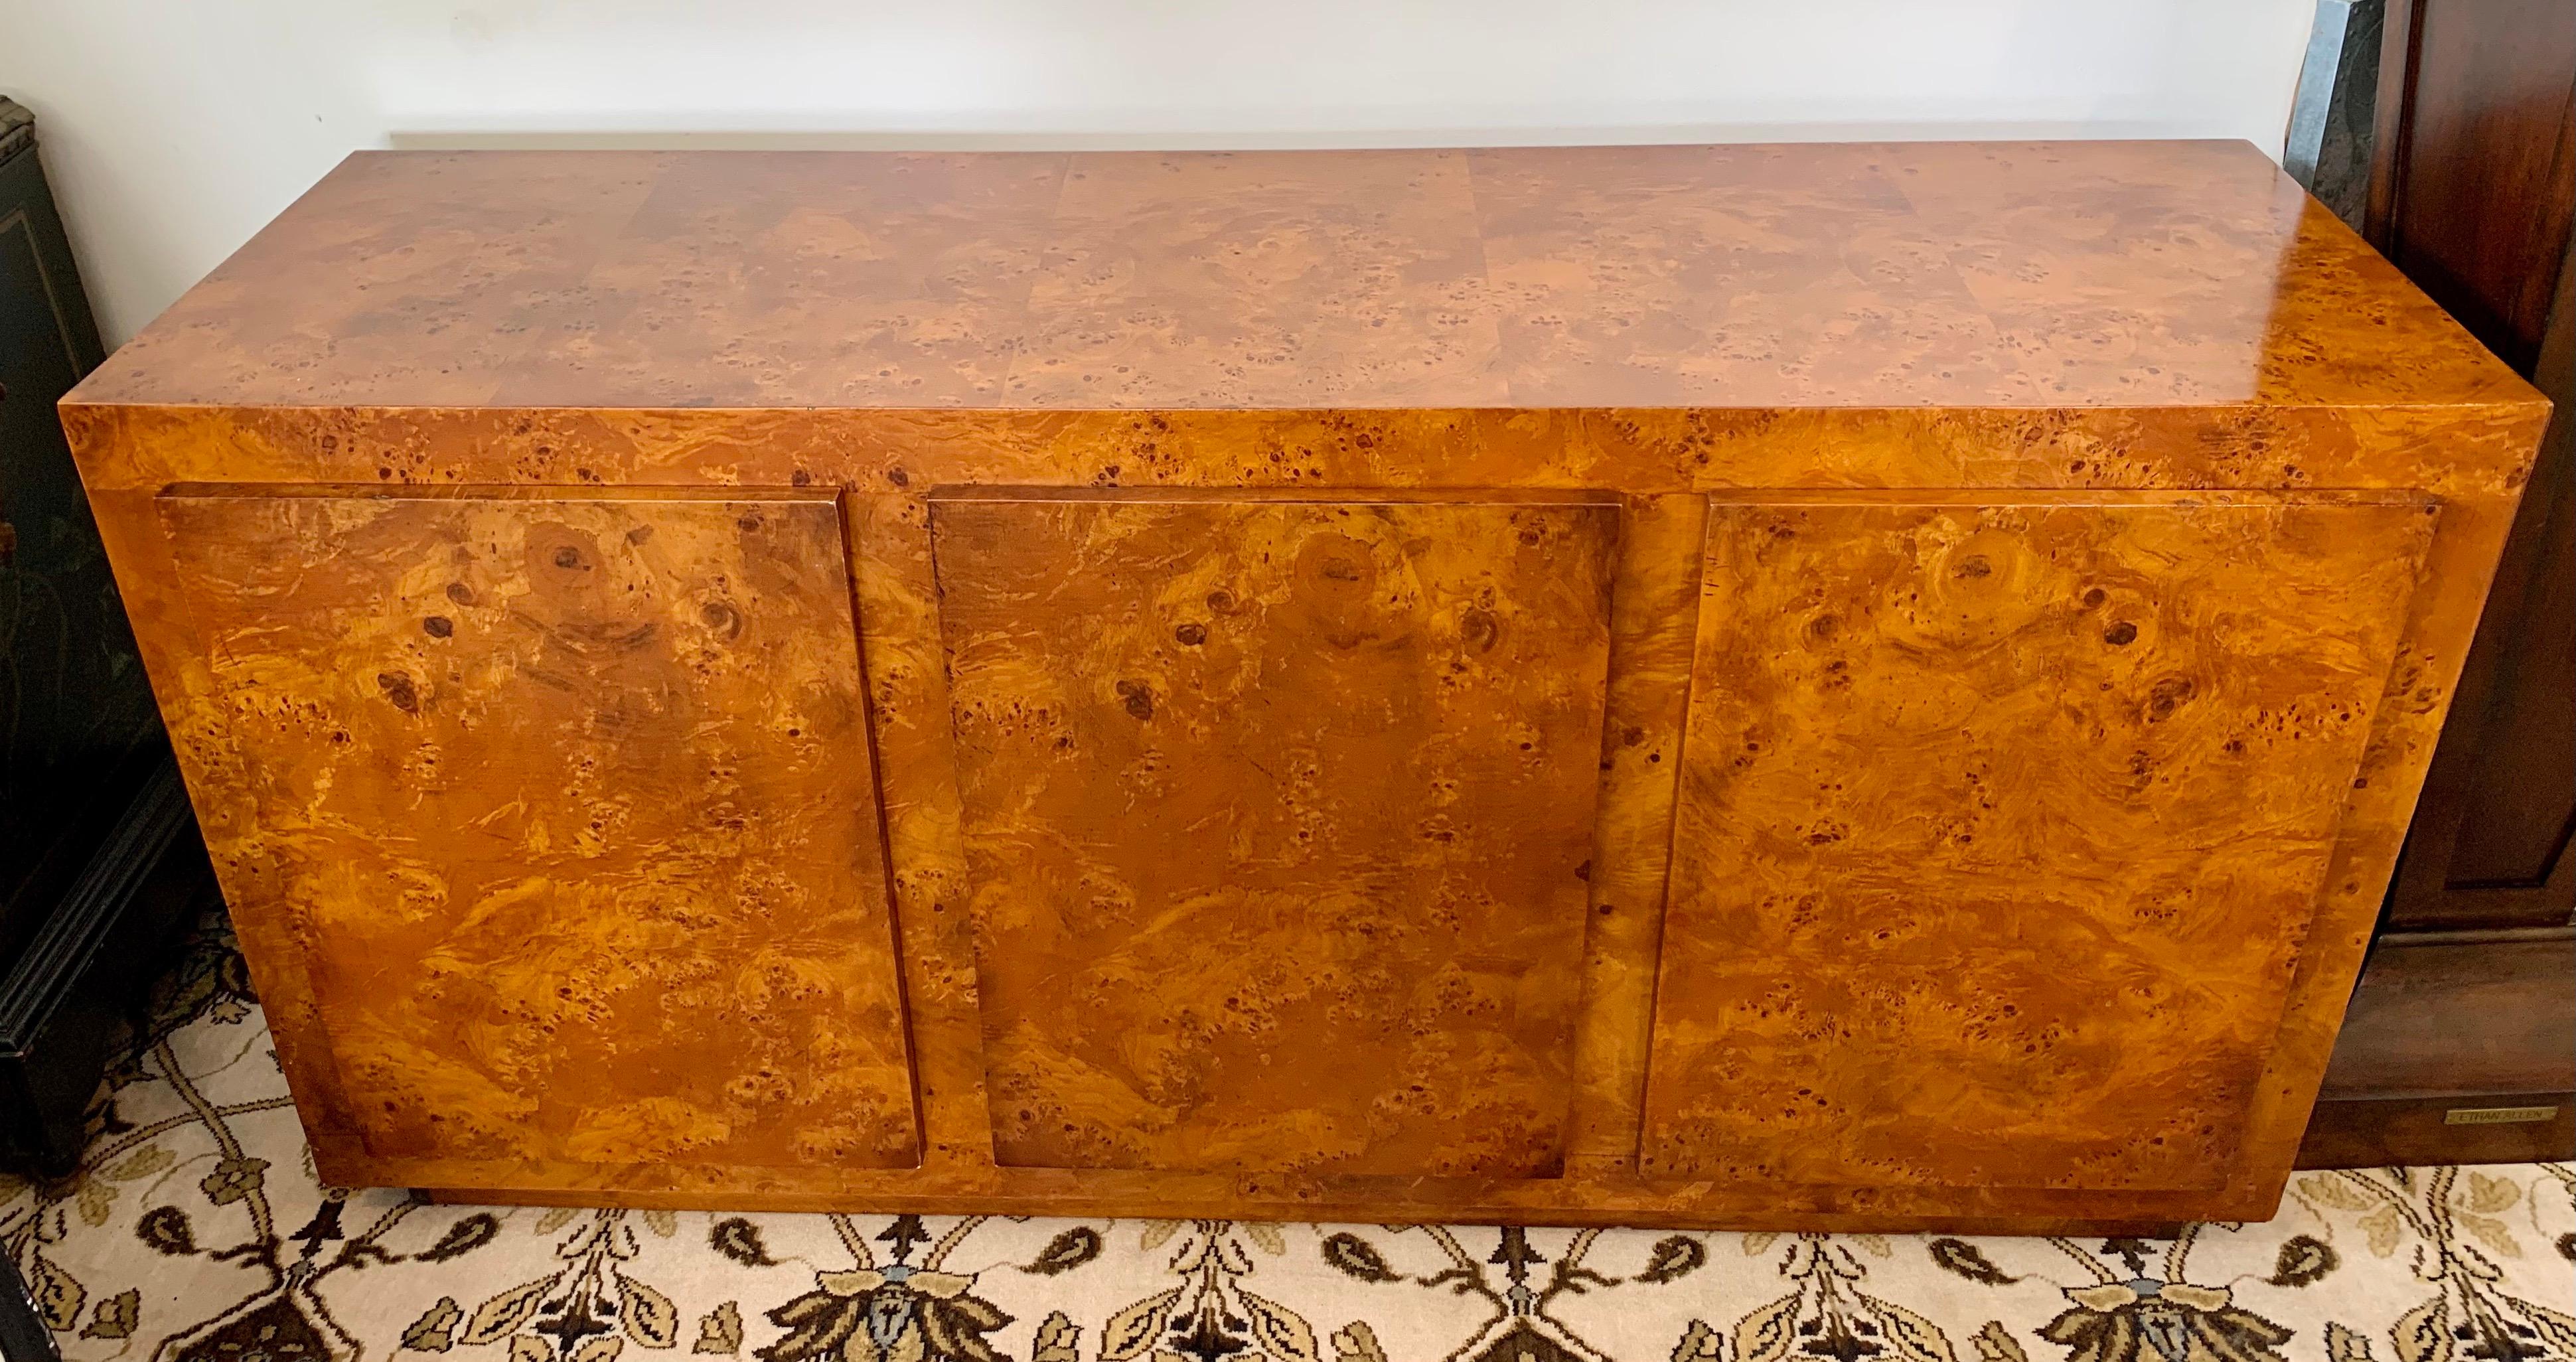 A magnificent John Stuart lacquered burlwood credenza/sideboard/buffet/dresser/dry bar - very versatile and multi-functional! The credenza has ample storage underneath including shelving and three drawers at left. The piece is still in exceptional